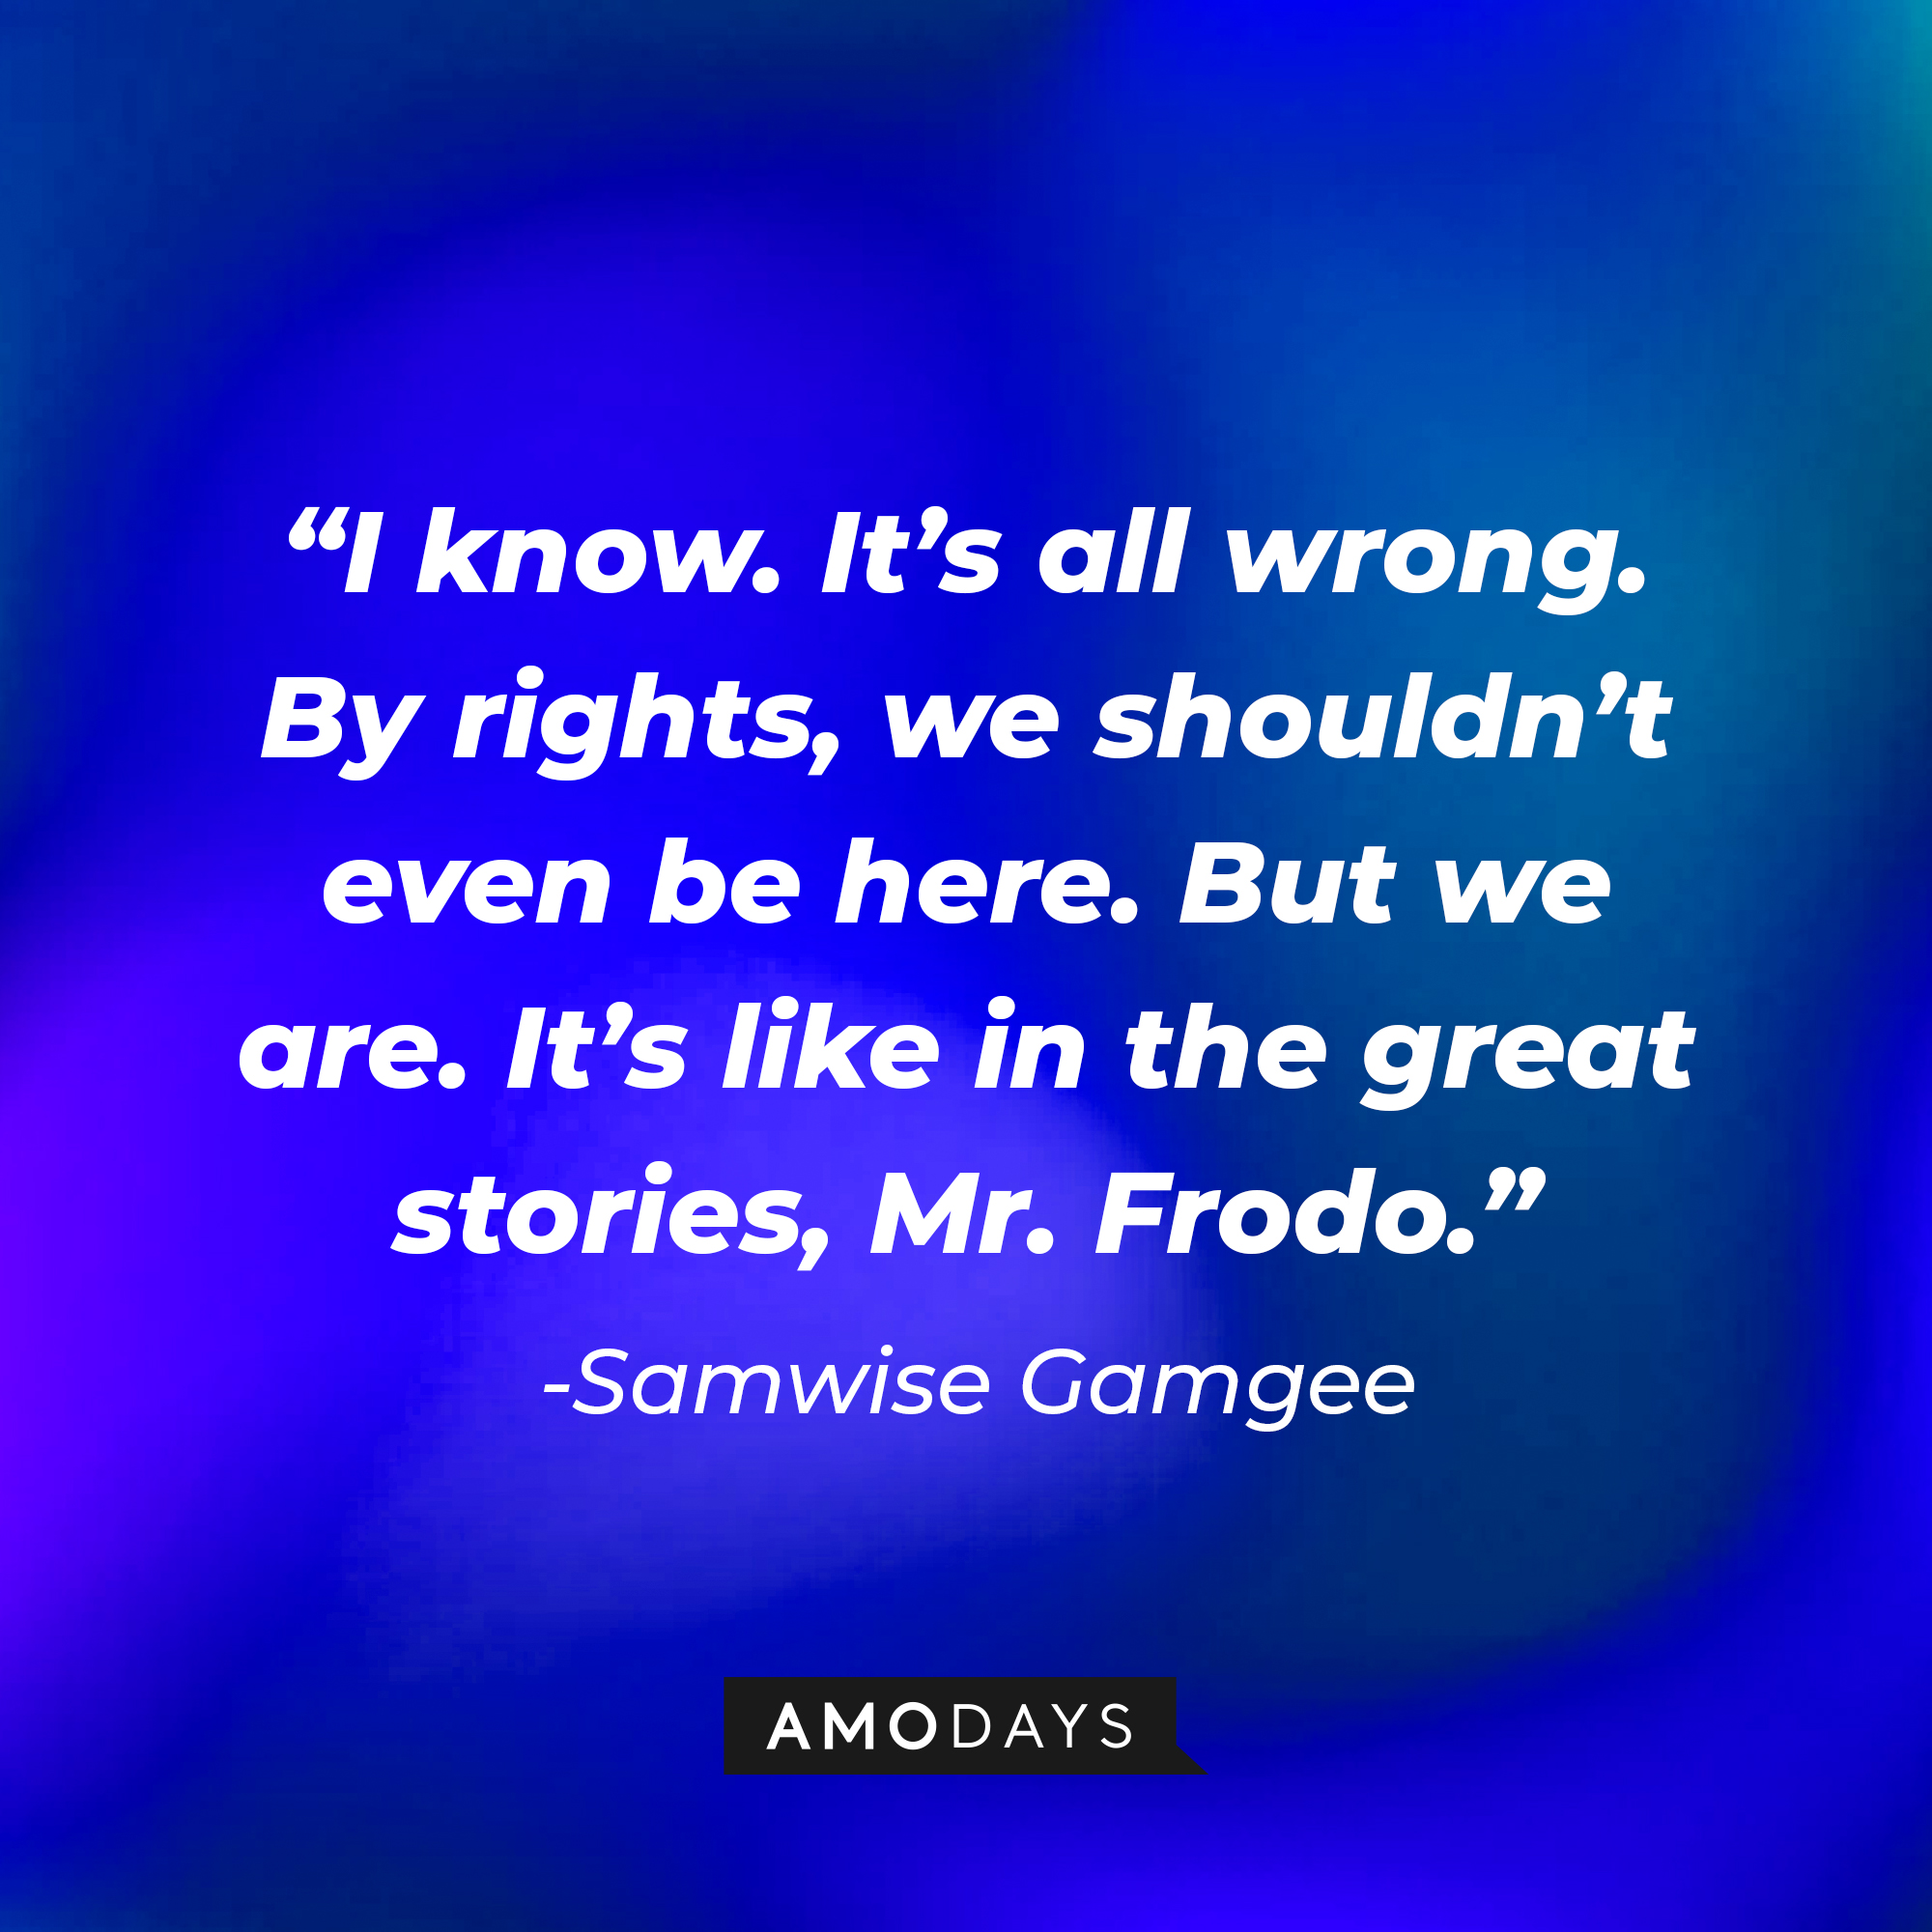 Samwise Gamgee's quote: “I know. It’s all wrong. By rights, we shouldn’t even be here. But we are. It’s like in the great stories, Mr. Frodo." | Source: Amodays